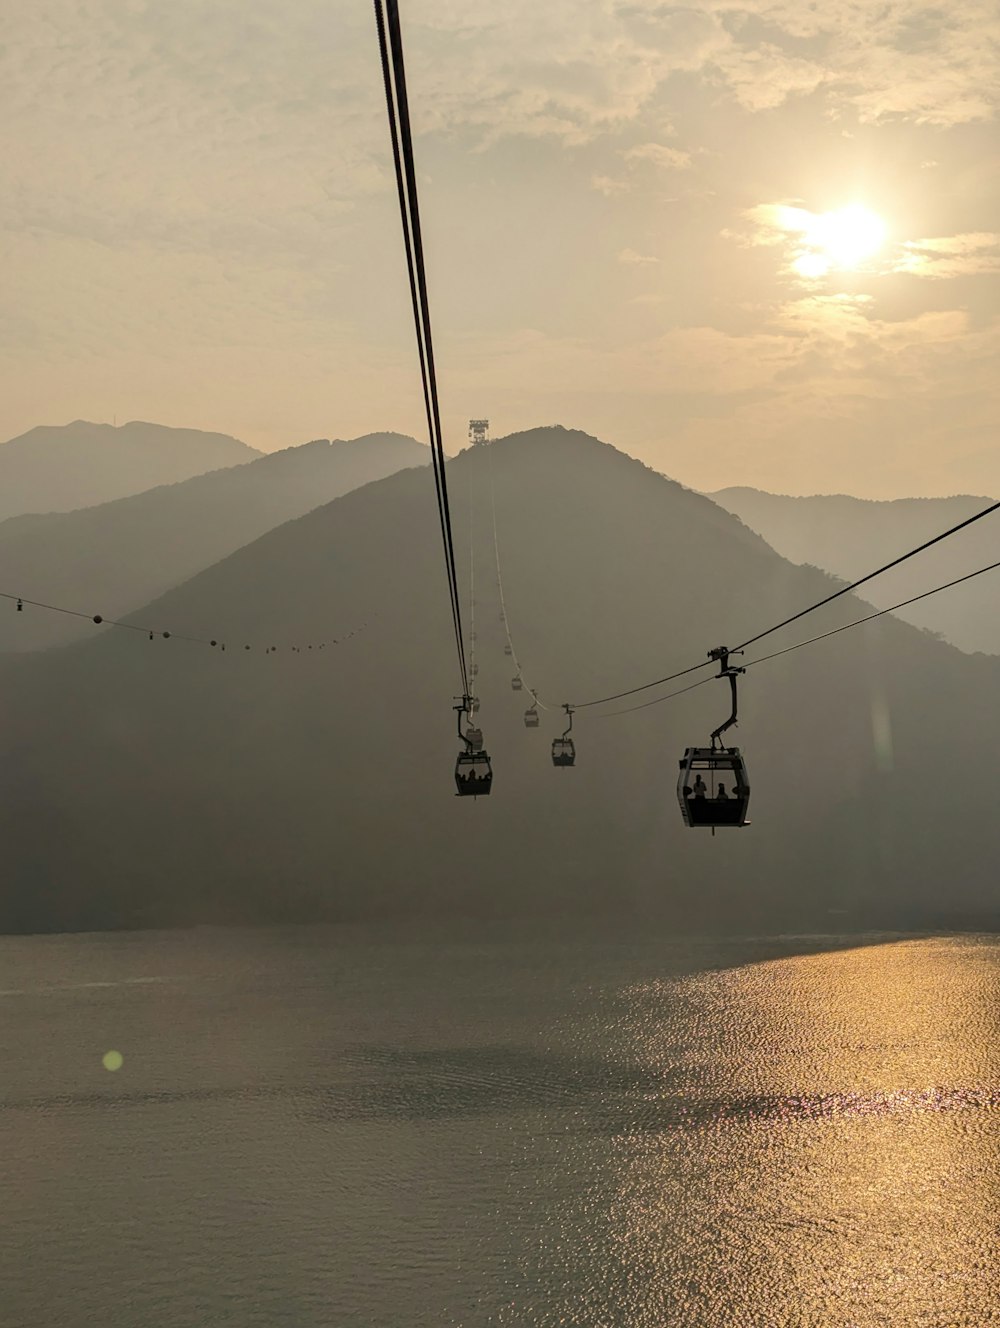 a couple of gondolas suspended over a body of water